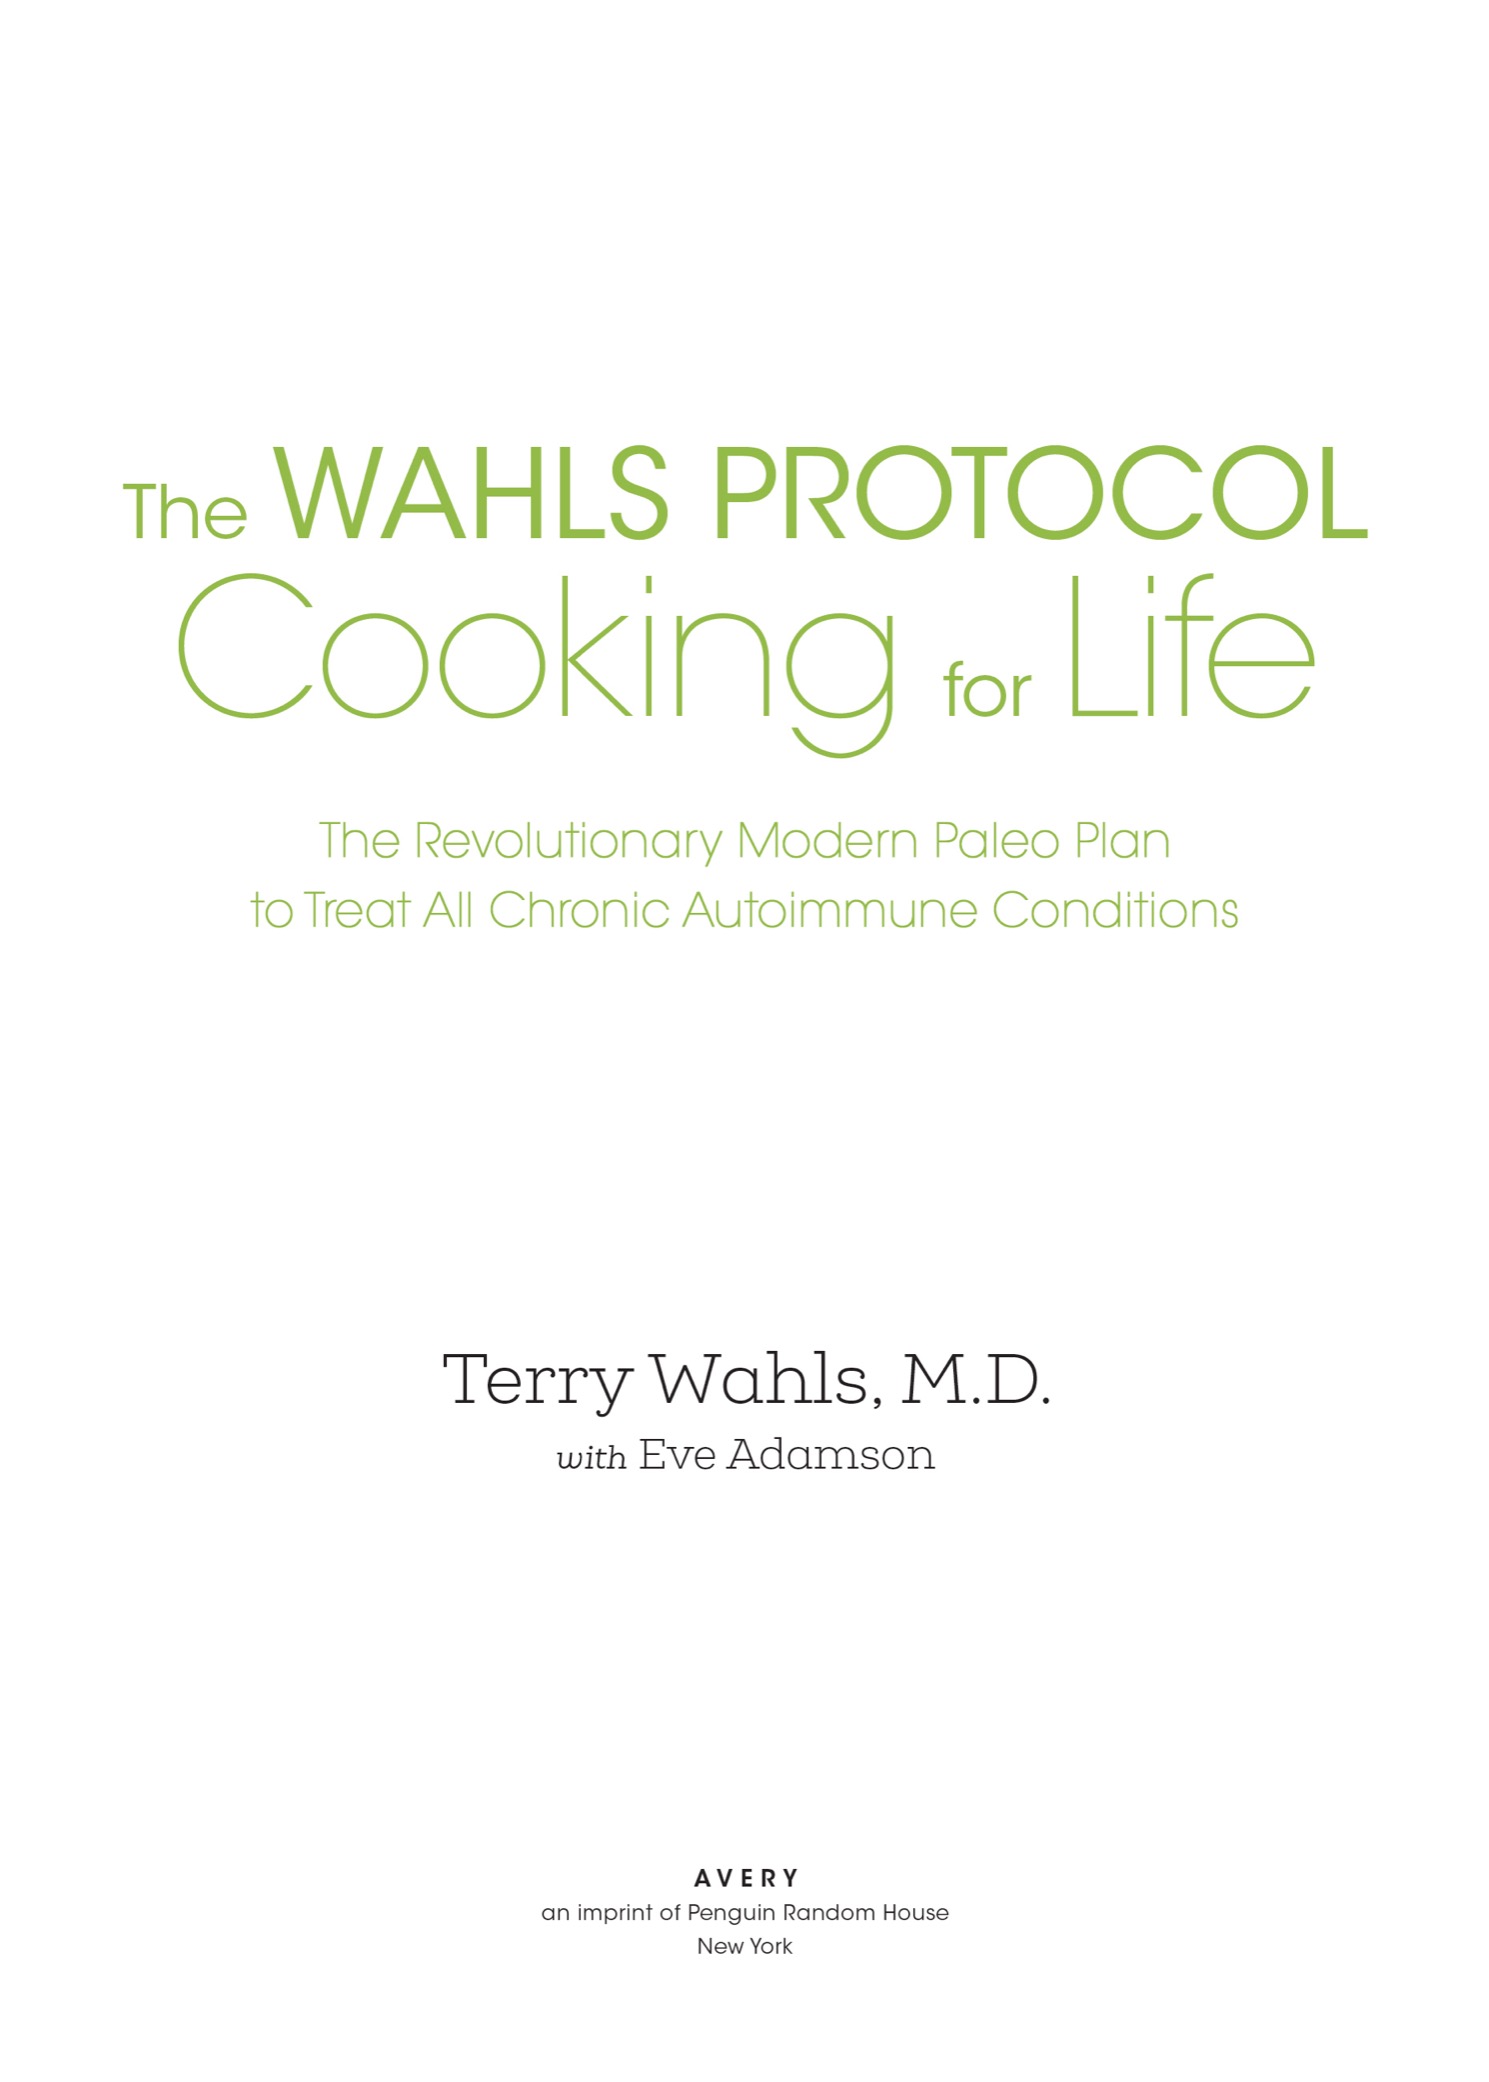 The Wahls protocol cooking for life - image 3